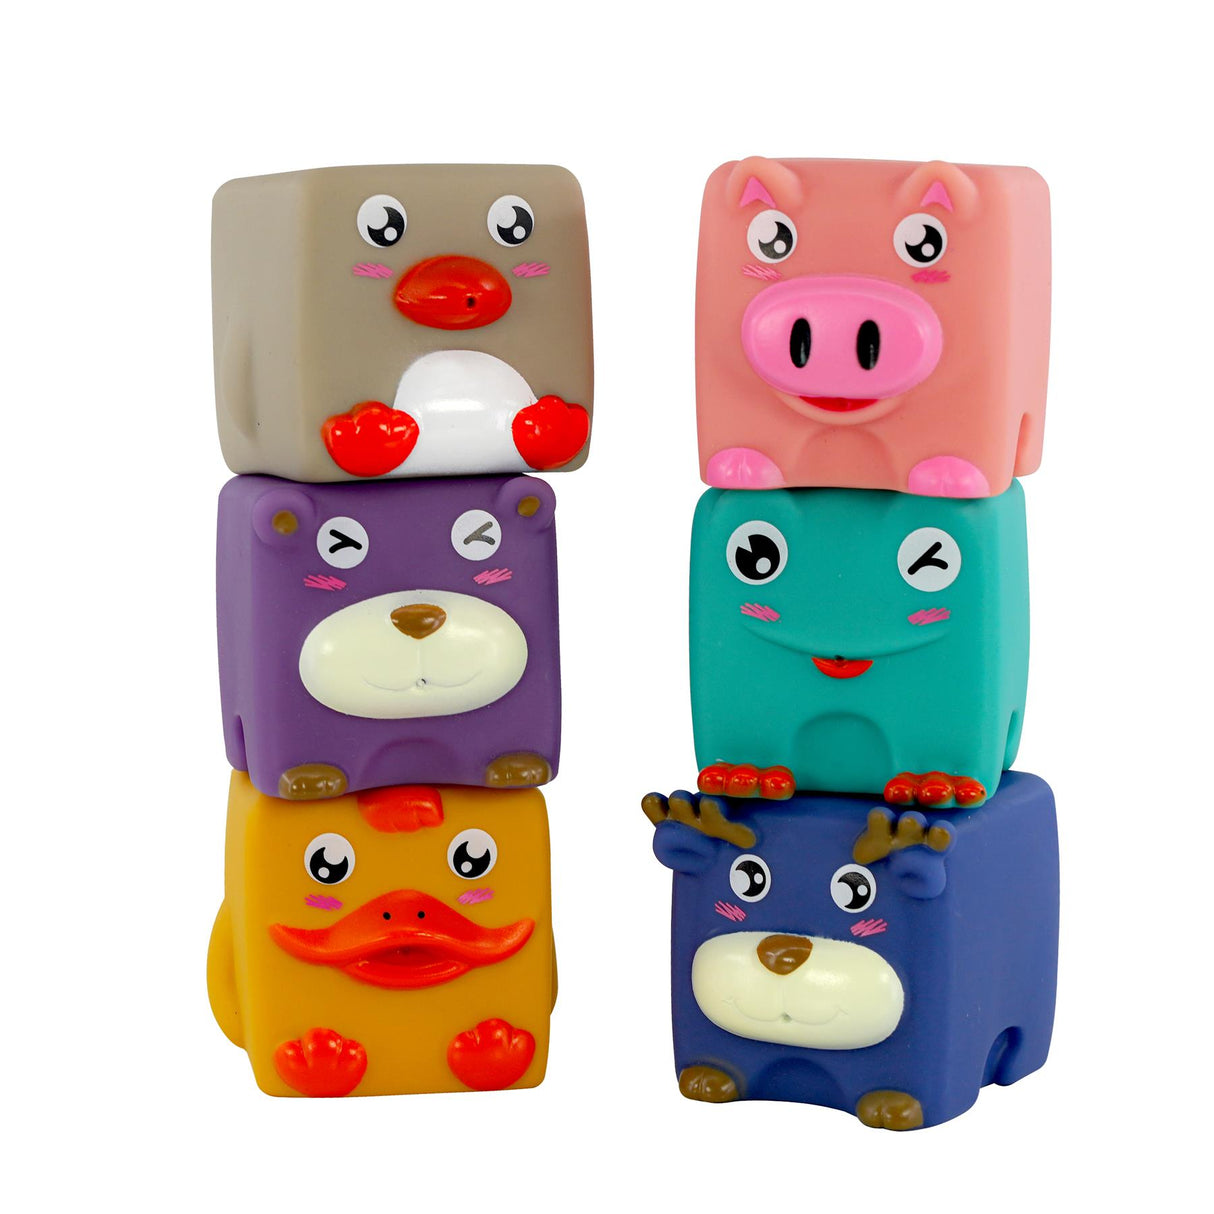 The Magic Toy Shop 6 Pieces Stacking Building Blocks With Squeaky Sound